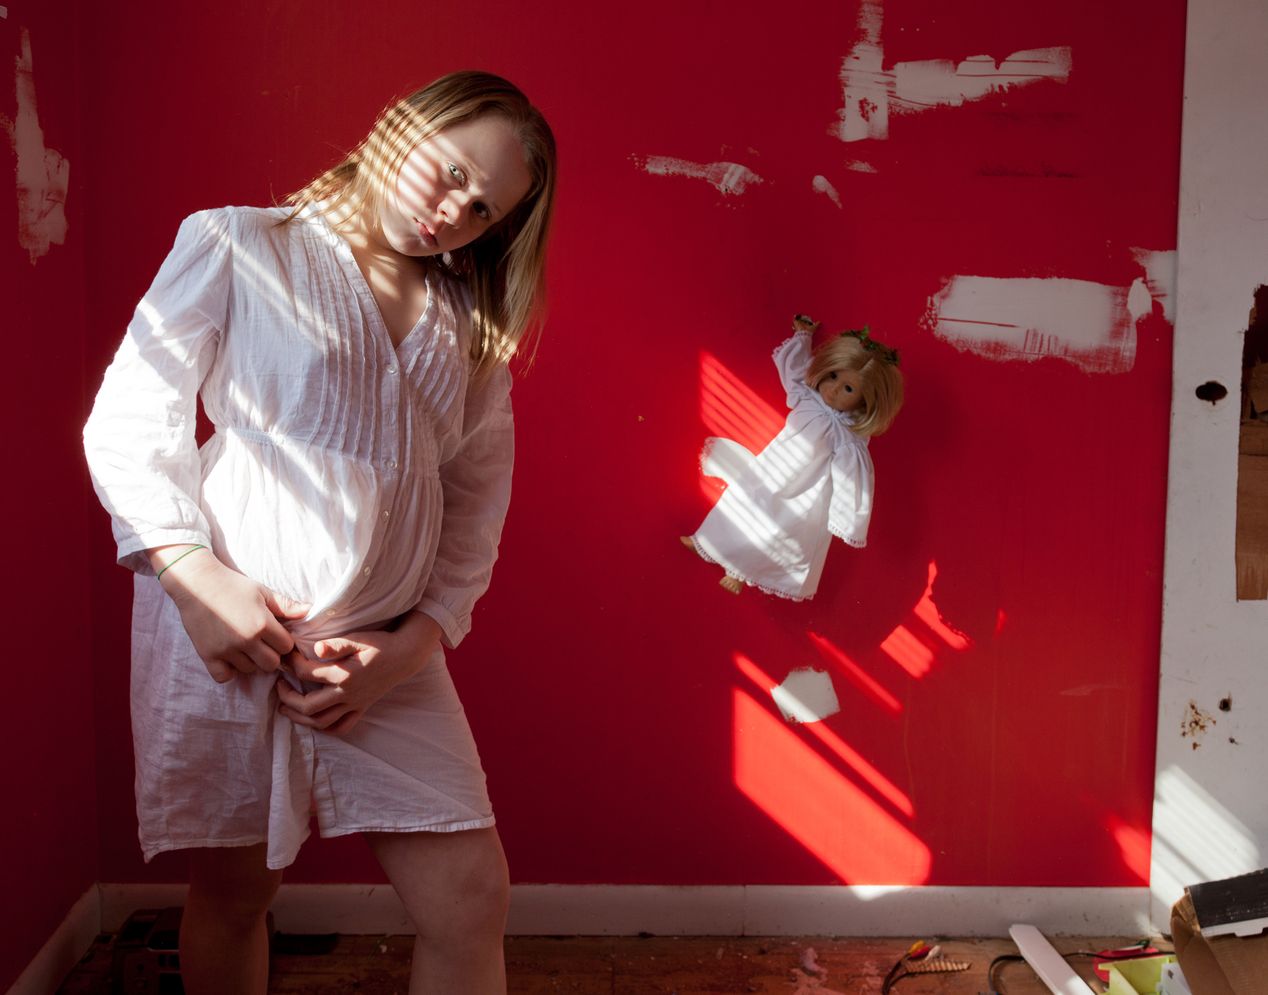 Young girl standing in a red room, buttoning her white dress, environmental portrait photography, Ilona Szwarc, contemporary Los Angeles artist.